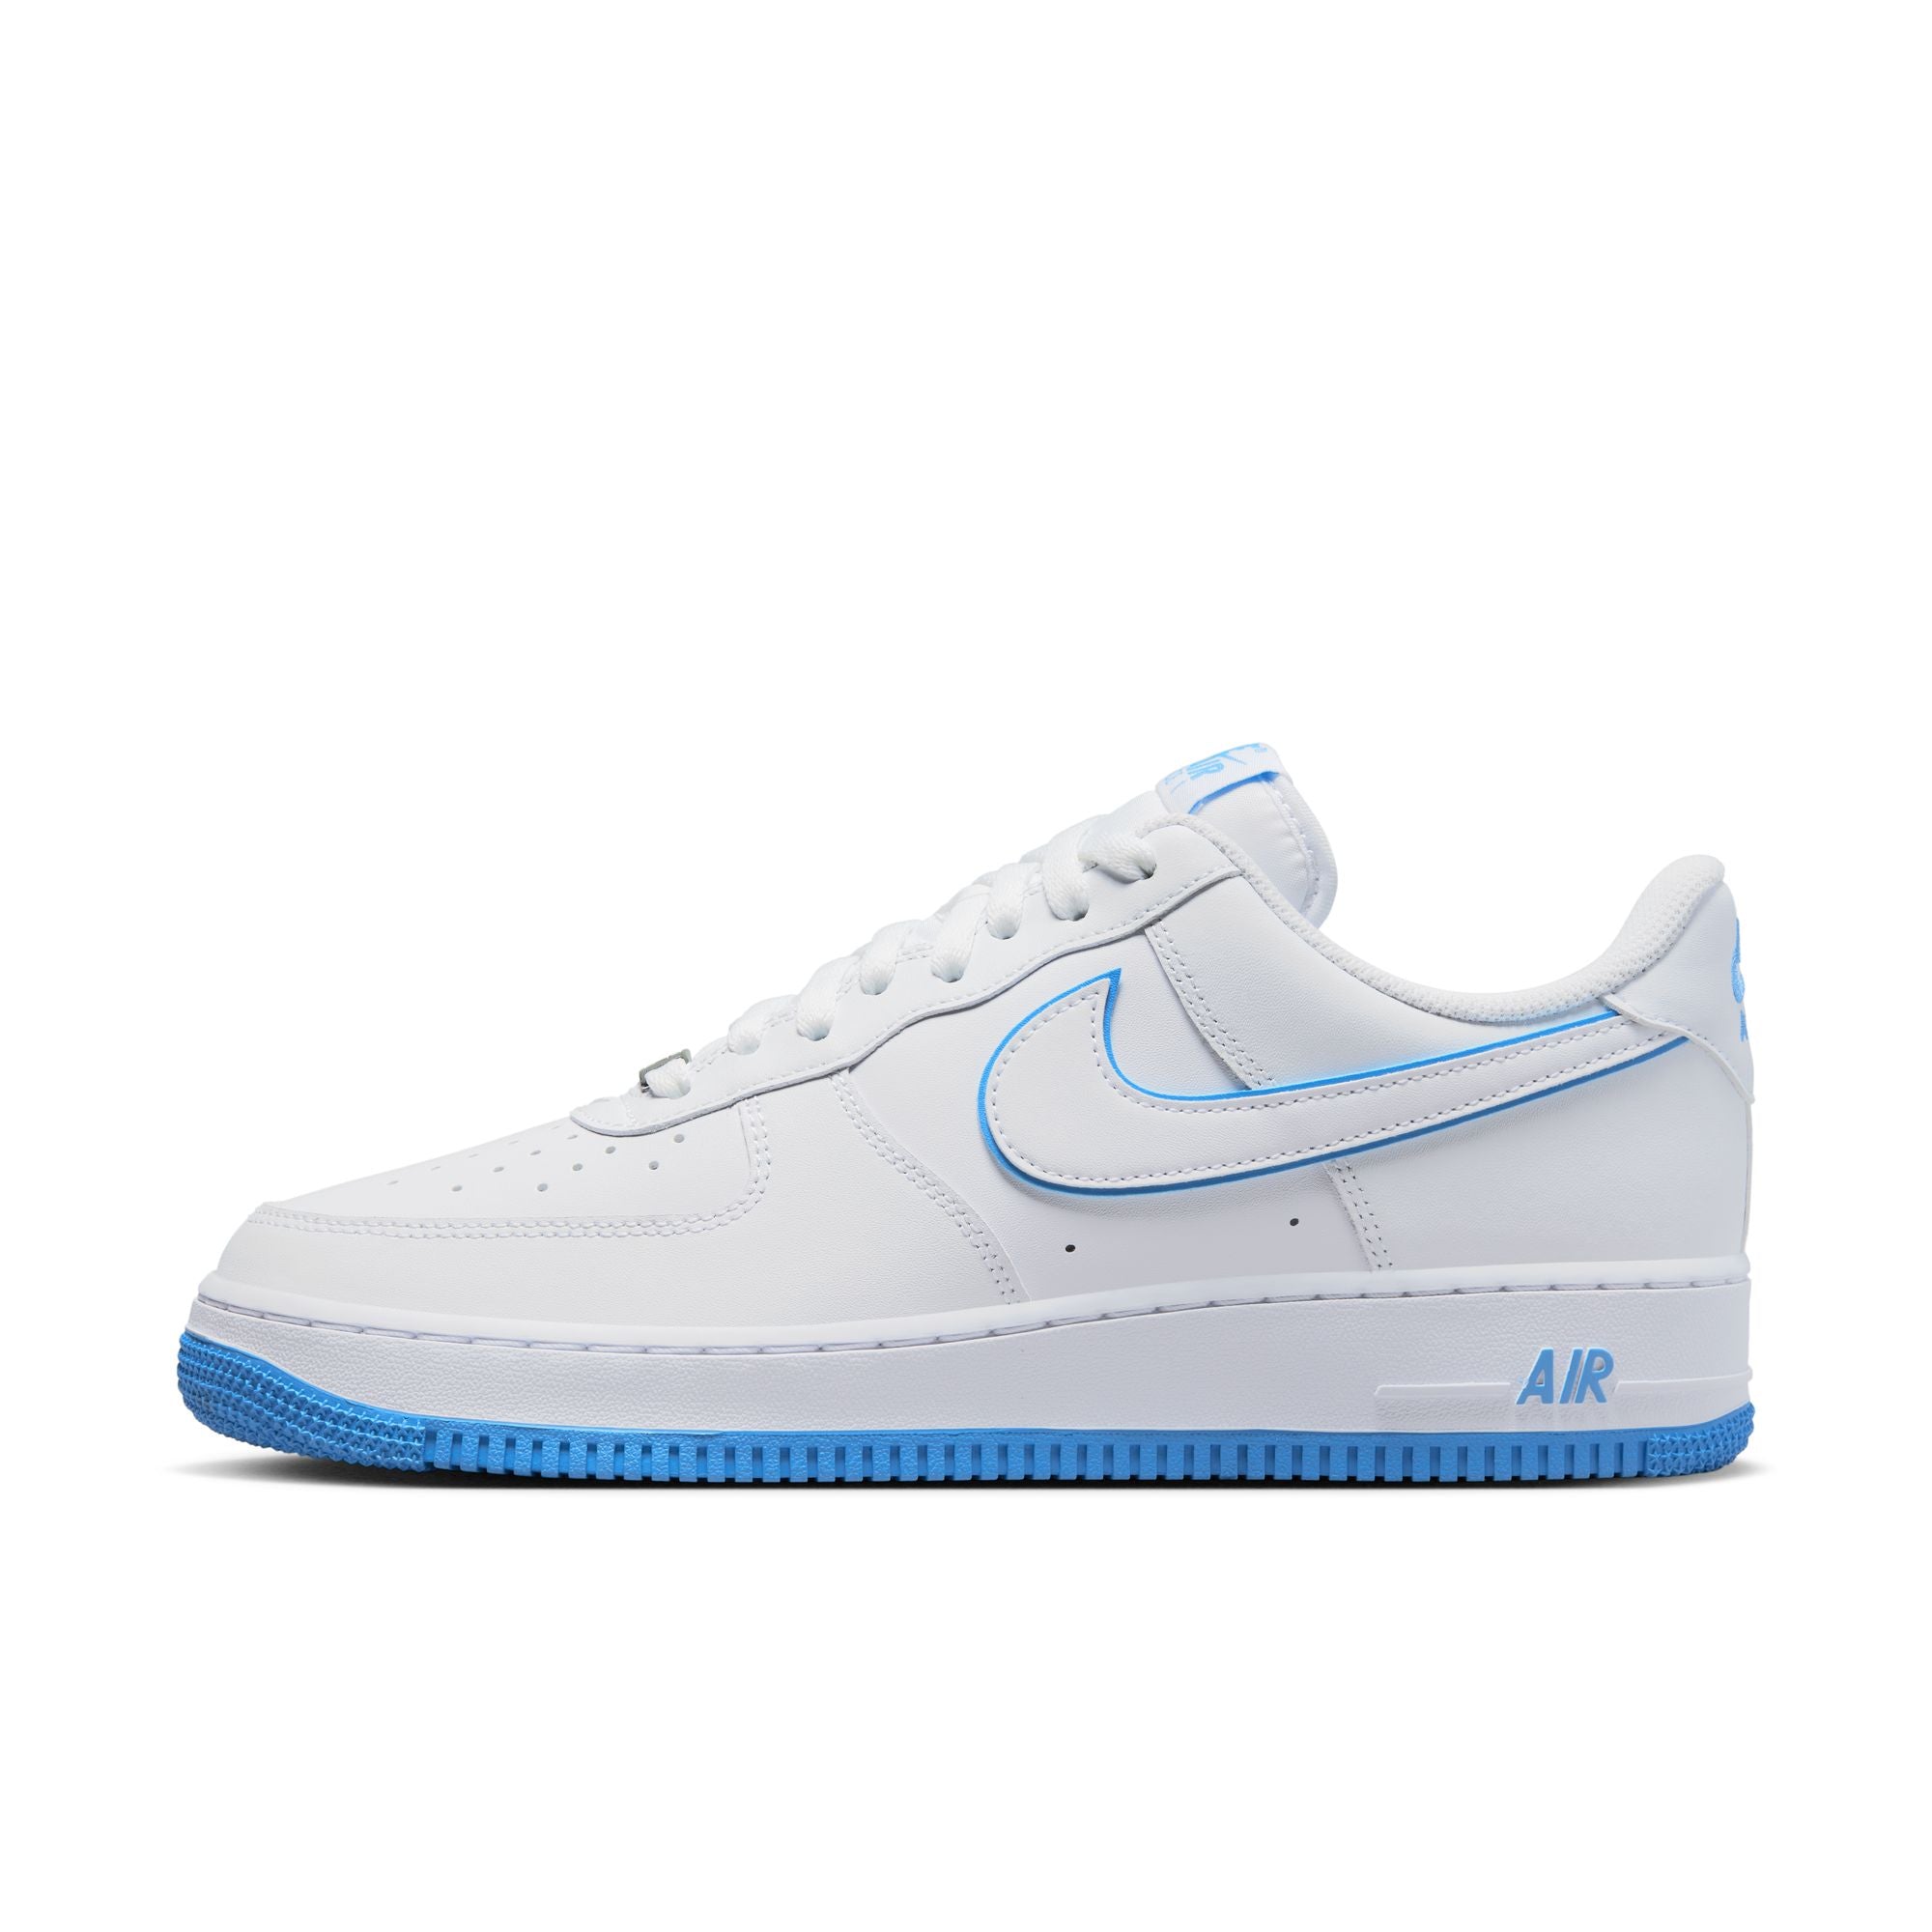 NIKE AIR FORCE 1 '07 LV8 - SAIL/ NIGHTMAROON/ GUMBROWN – Undefeated